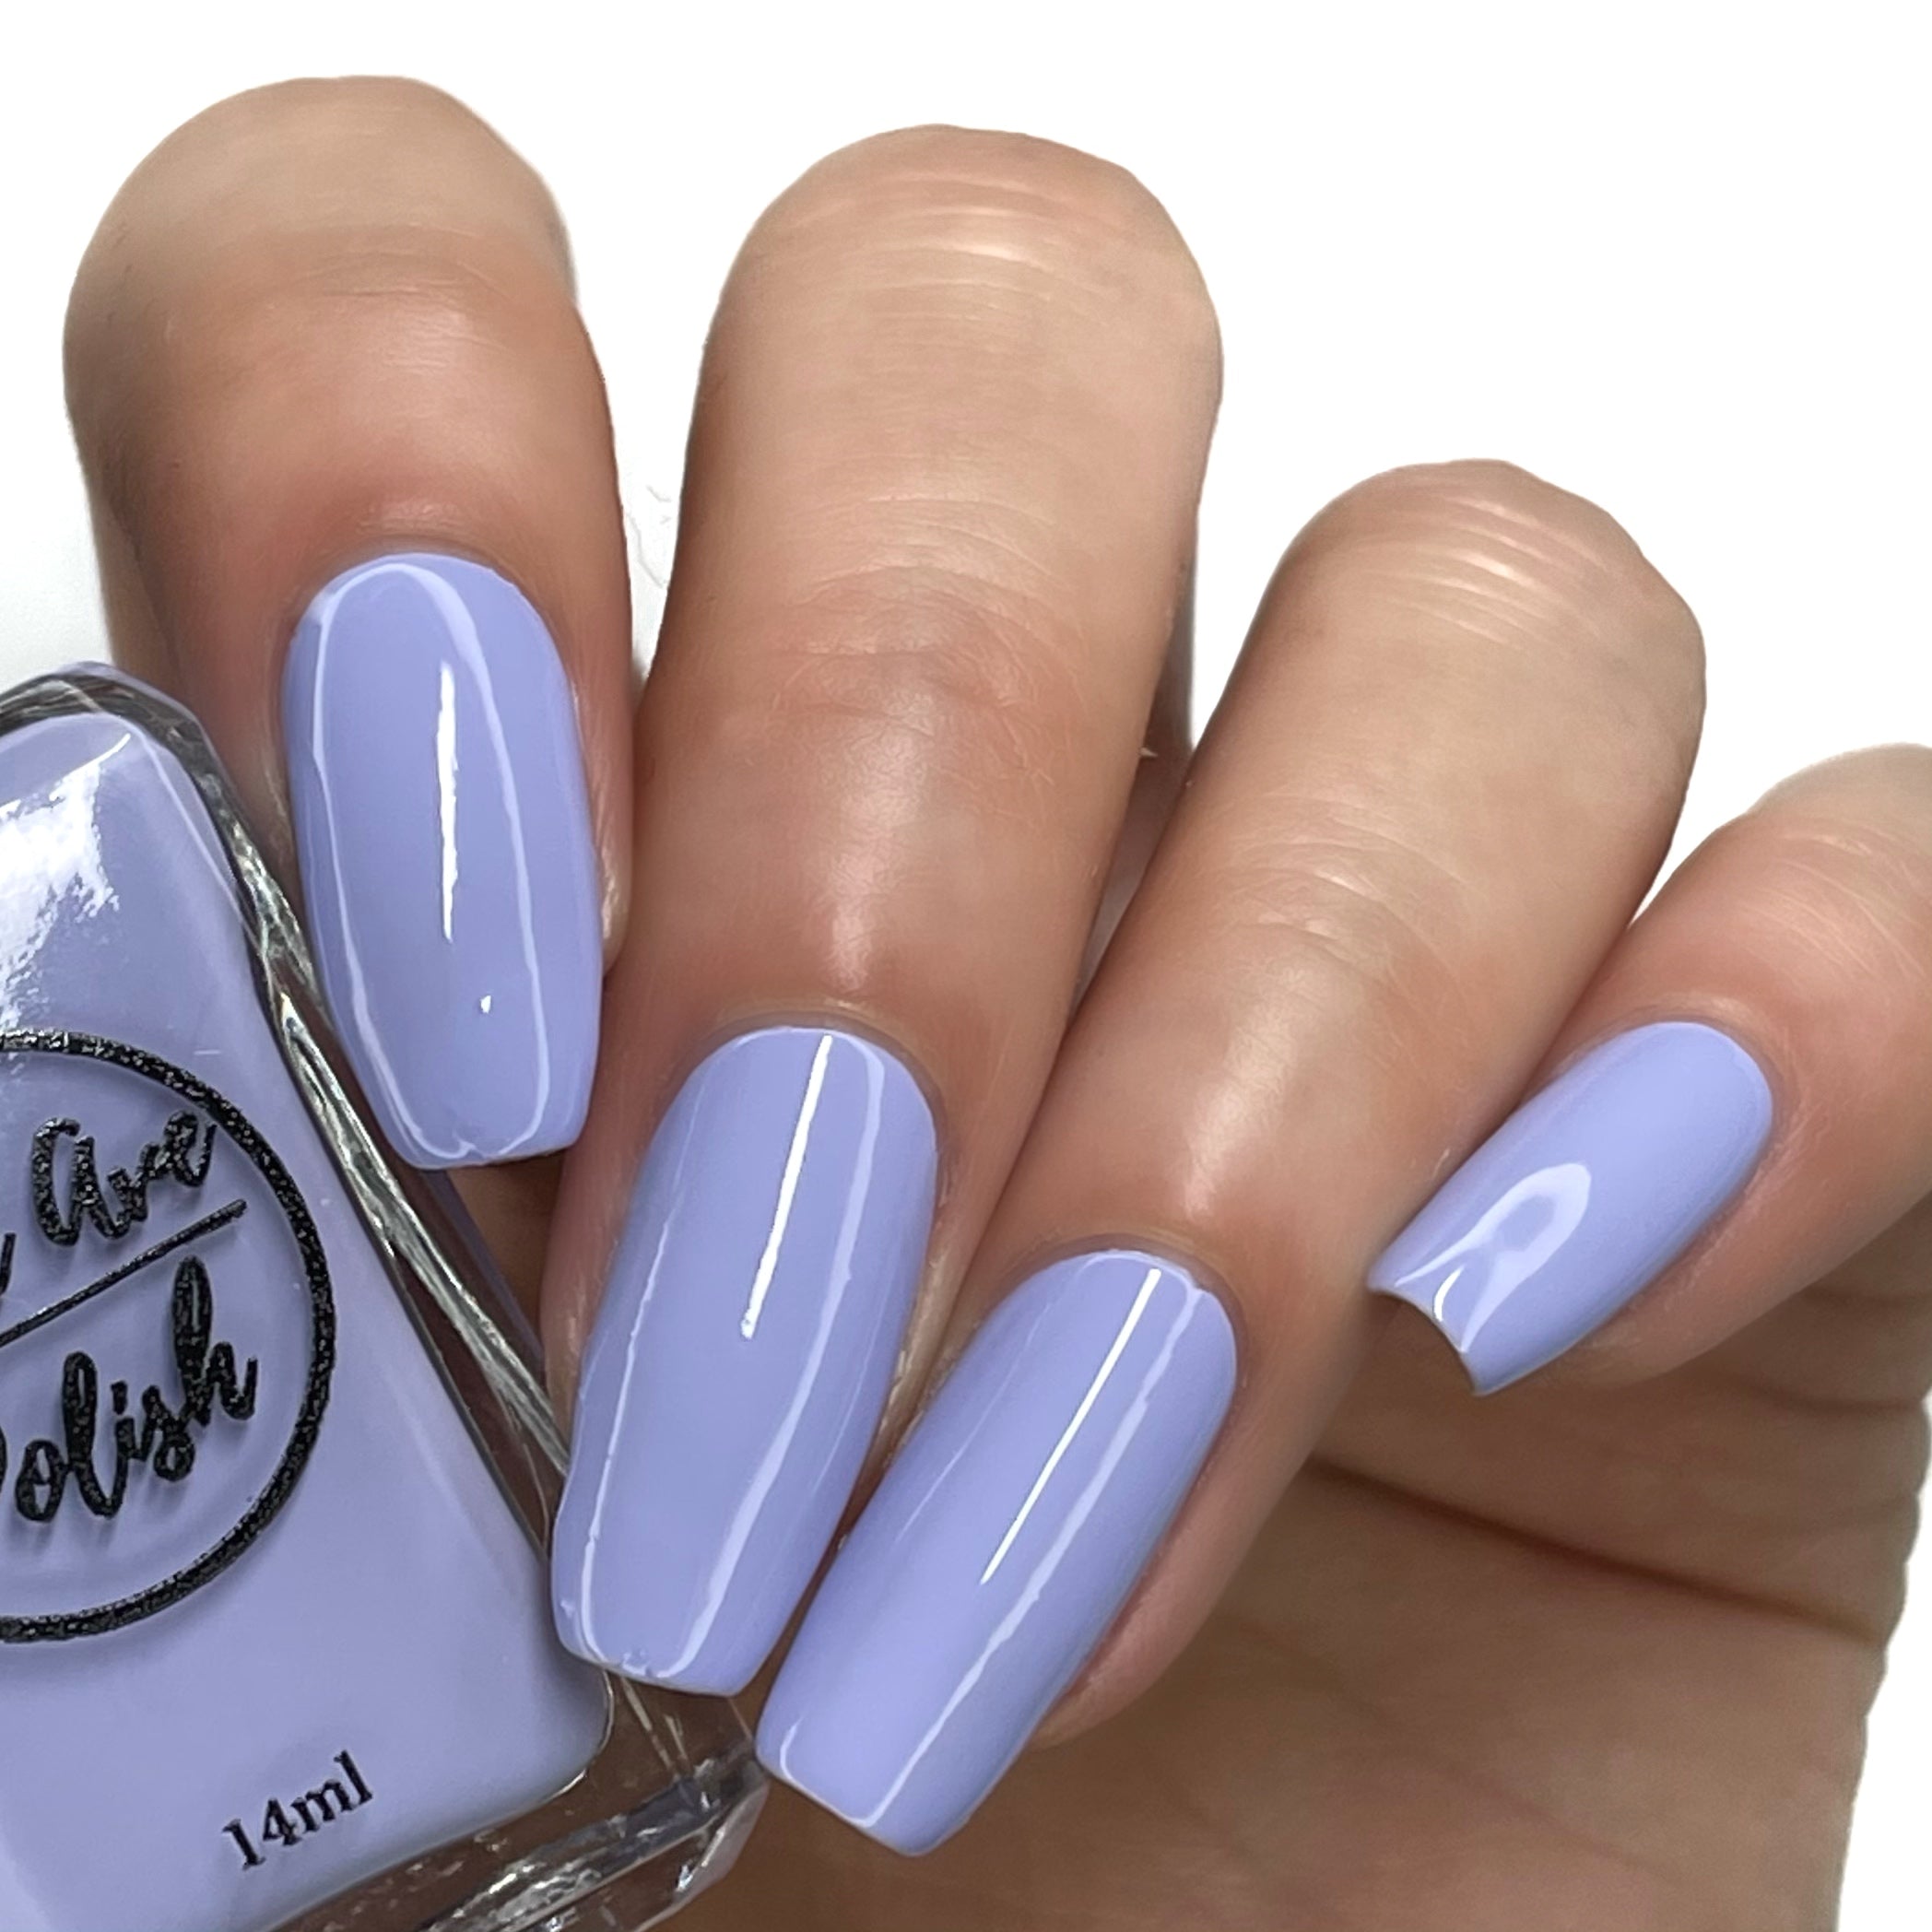 Daisy DND Purples Soak Off GEL POLISH DUO, All In One Gel Lacquer +  Matching Nail Polish Color for Nails (with bonus side Glitter) Made in USA ( Lavender Blue (573)) - Walmart.com